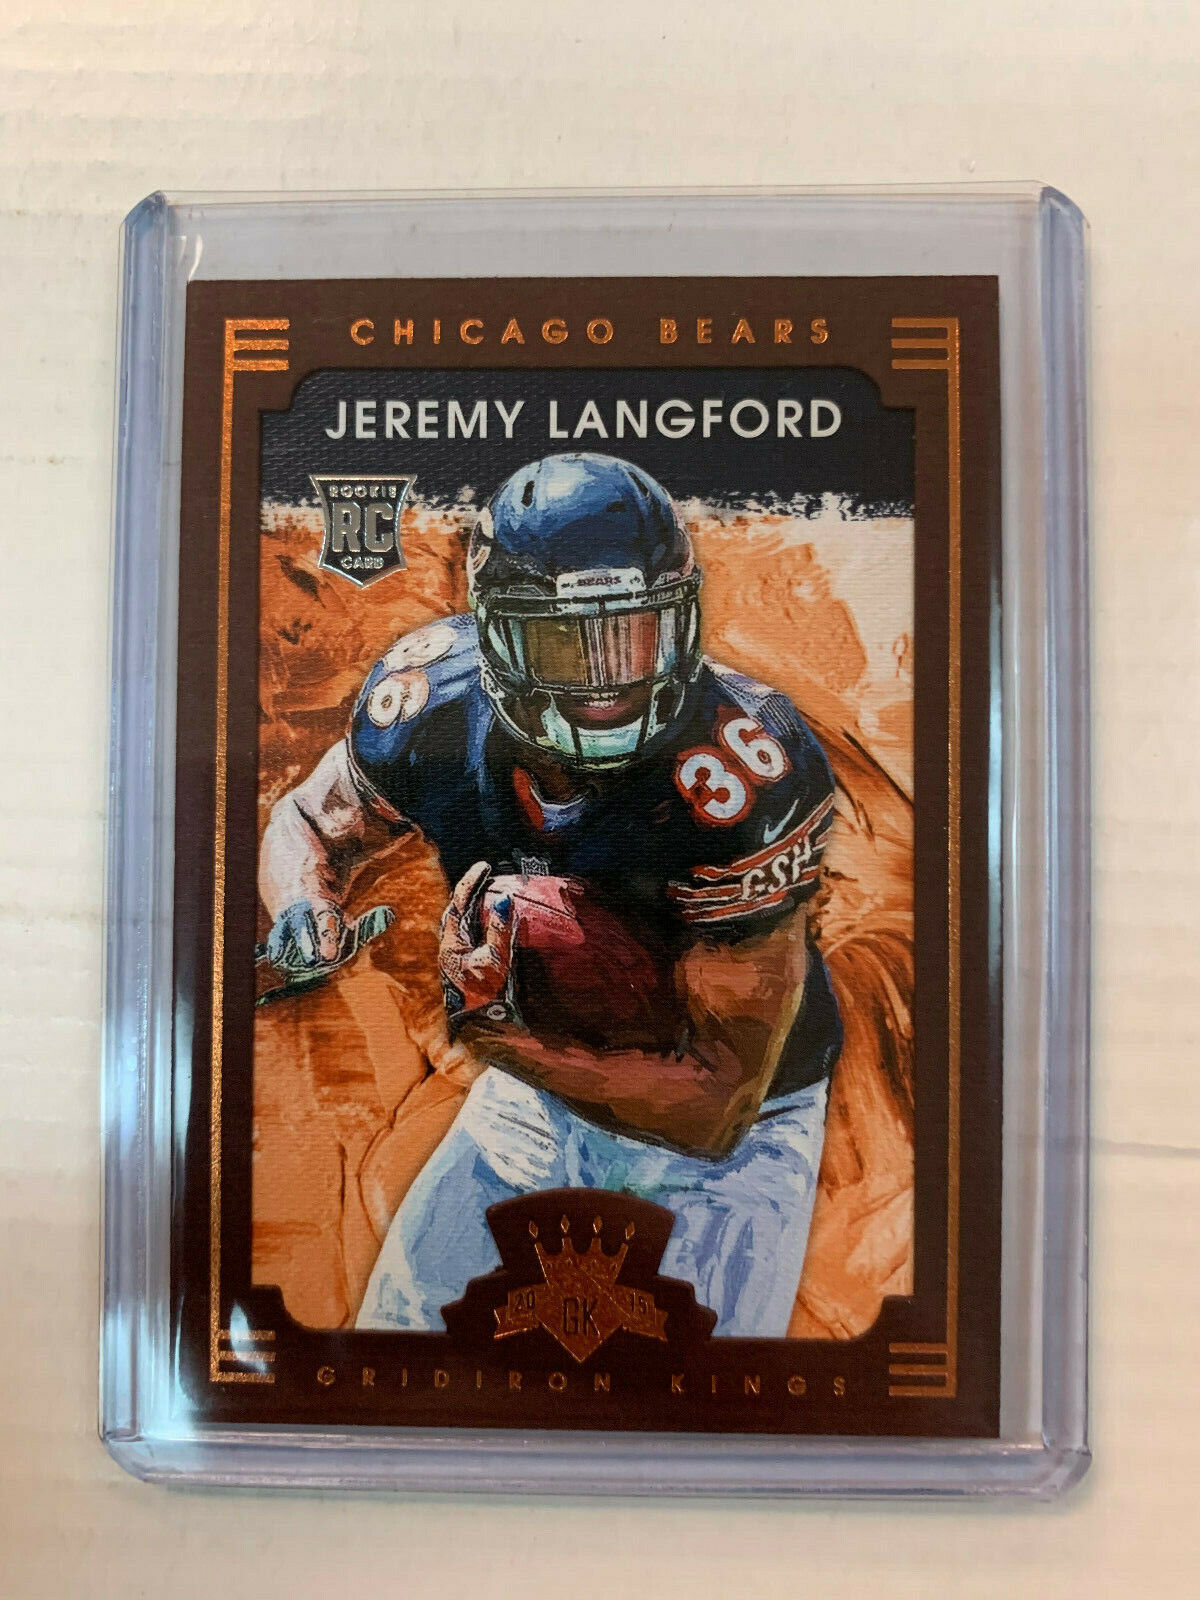 Jeremy Langford 2015 Gridiron Kings Rookie Bronze Border Card #129. rookie card picture